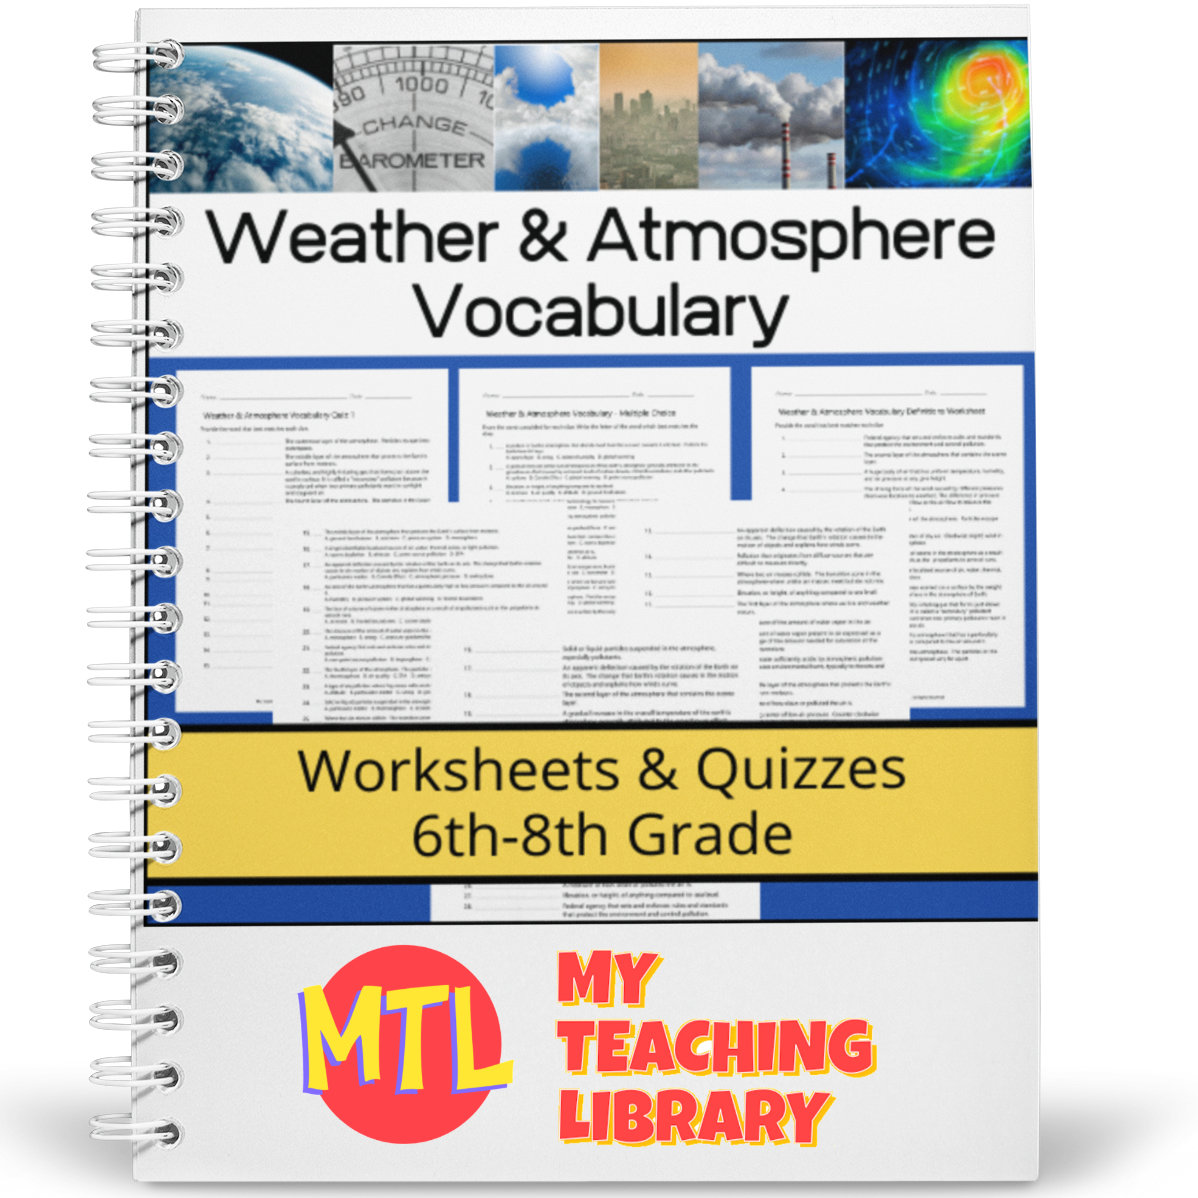 This science  vocabulary resource is designed to help students learn and then assess their knowledge of 28 middle school level words.